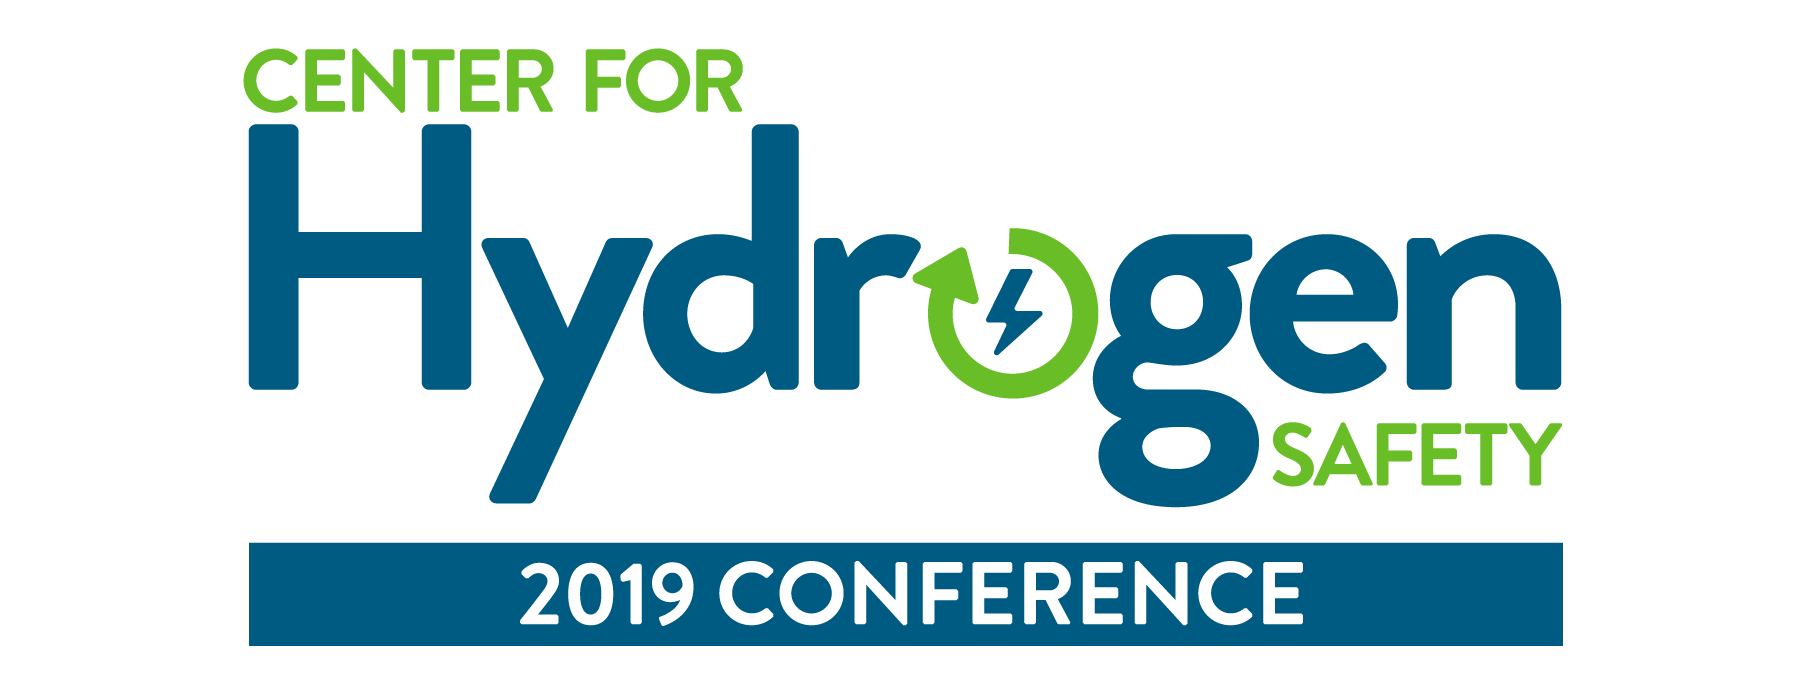 Center for Hydrogen Safety Conference 2019 Hydrogen Fuel Cell Partnership